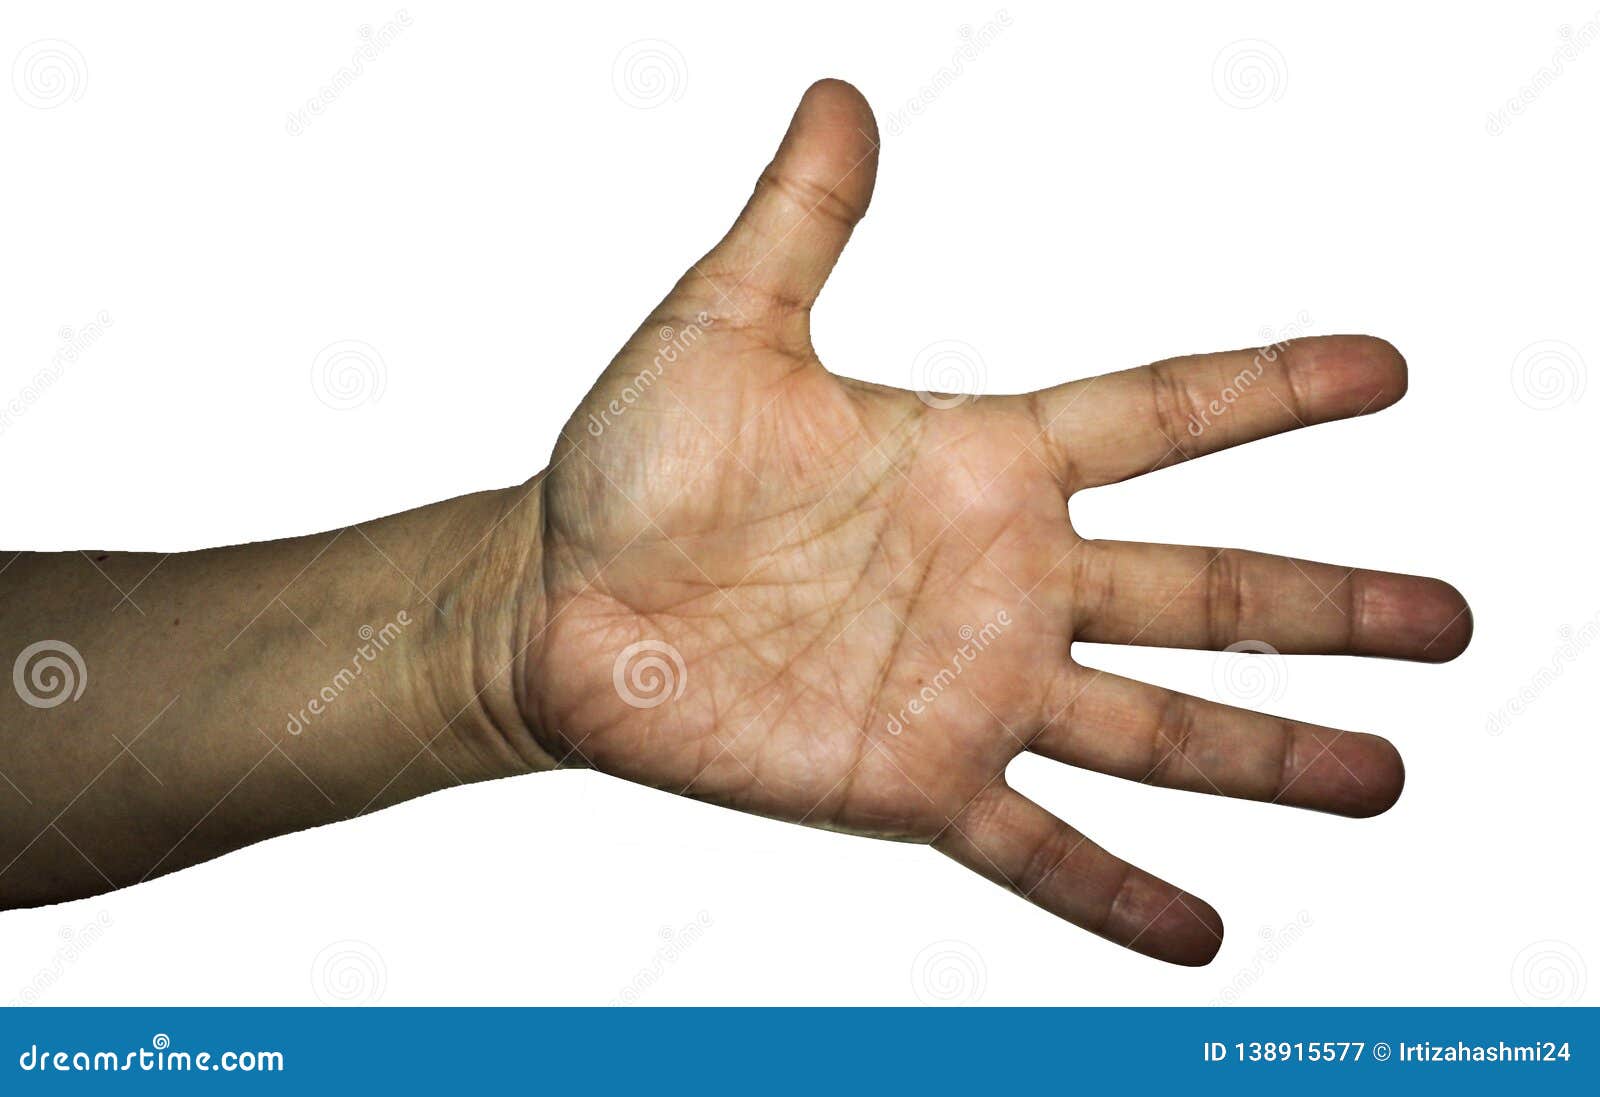 Five 5 Fingers stock image. Image of skin, male, person - 138915577